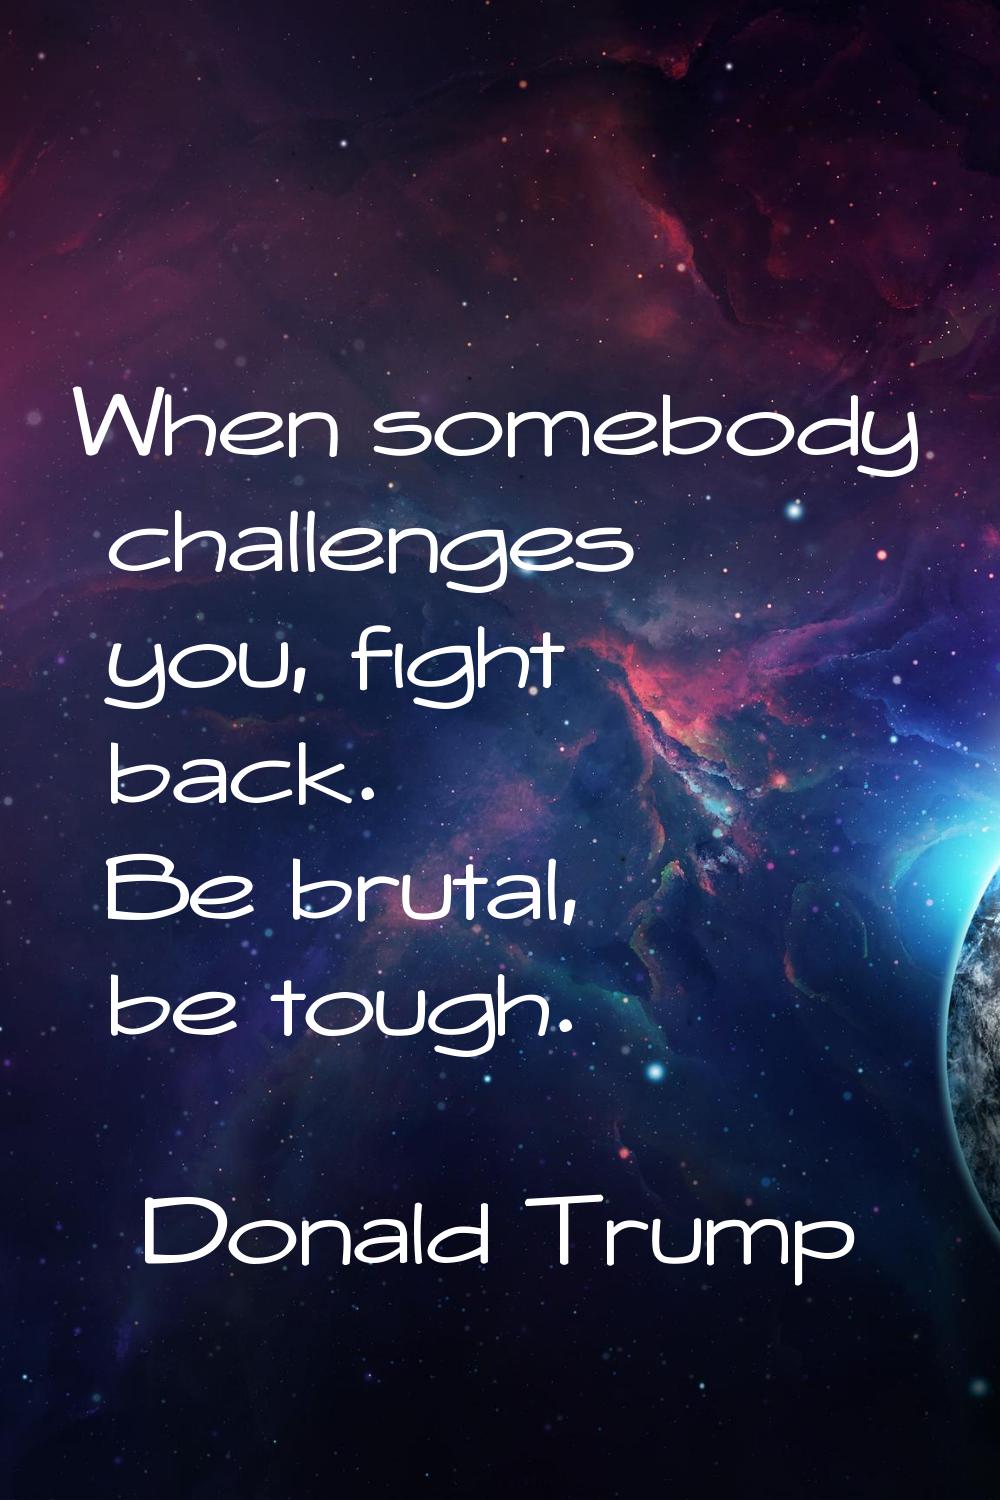 When somebody challenges you, fight back. Be brutal, be tough.